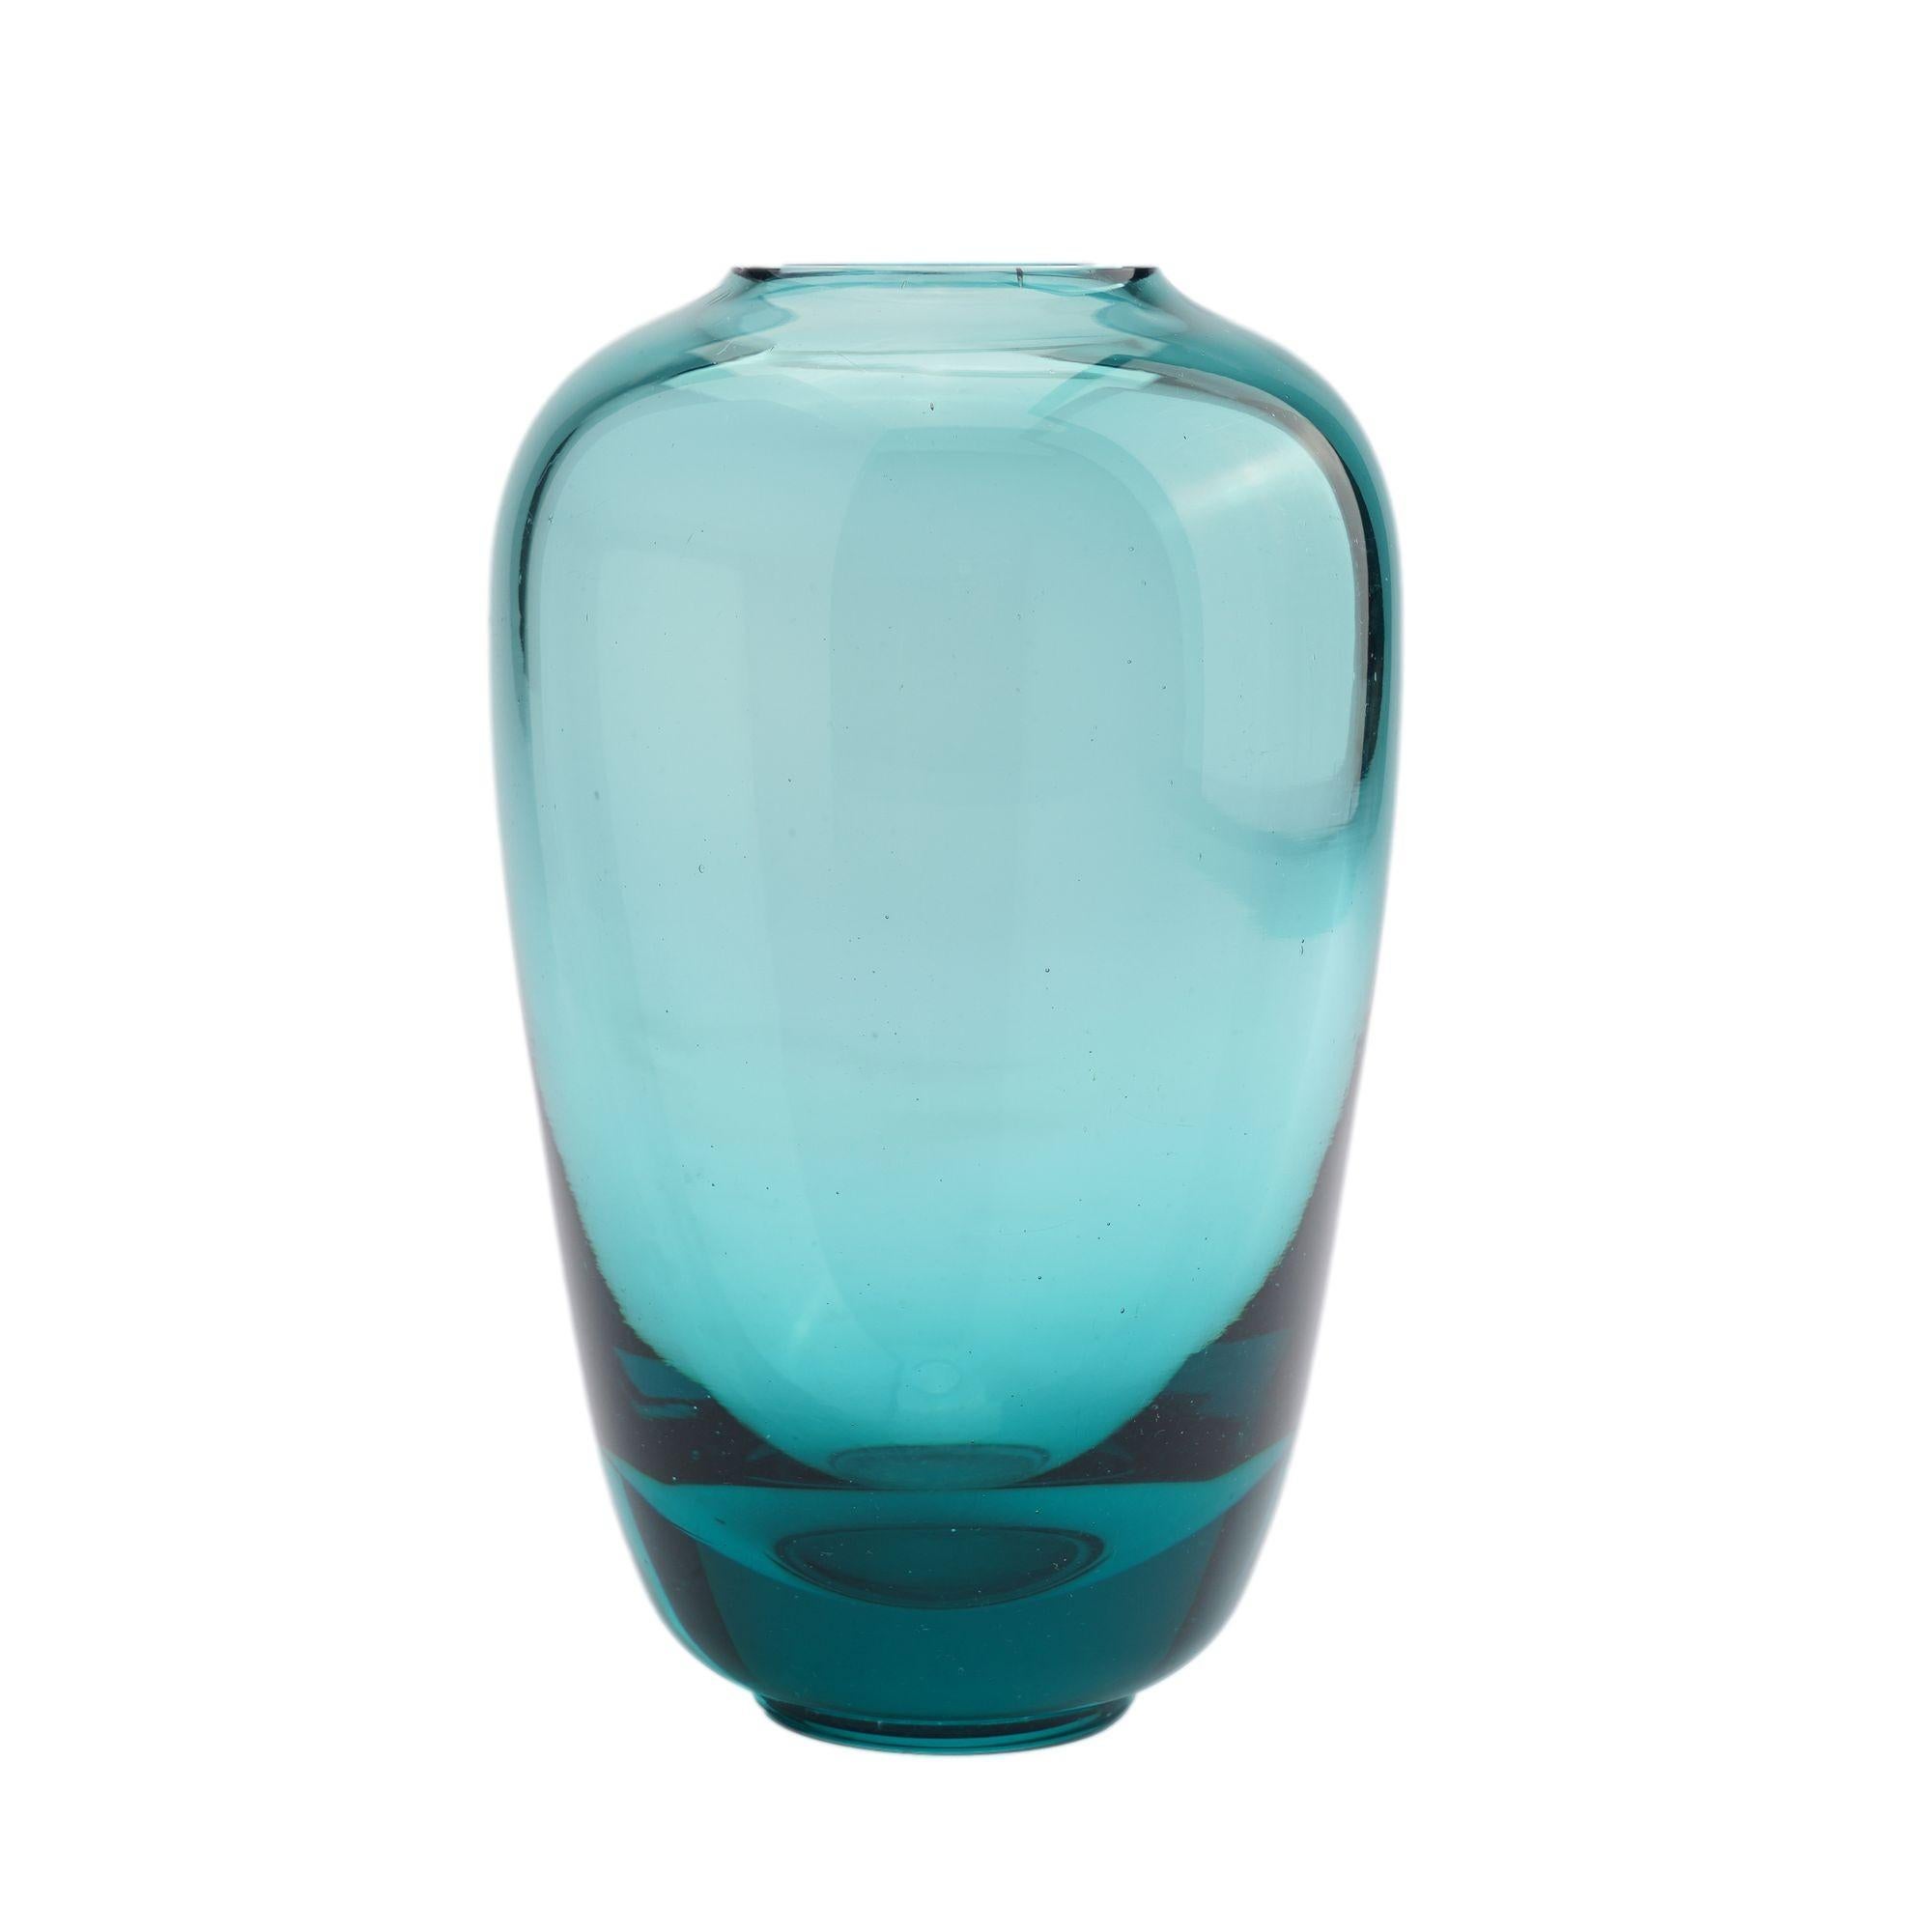 Blown and tapered art glass vase in Karhula's signature blue/green color and detailed with circular foot with polished pontil. Designed by Göran Hongell.

Signed on the underfoot: GF 11, Karhula

Finland, 1940's.